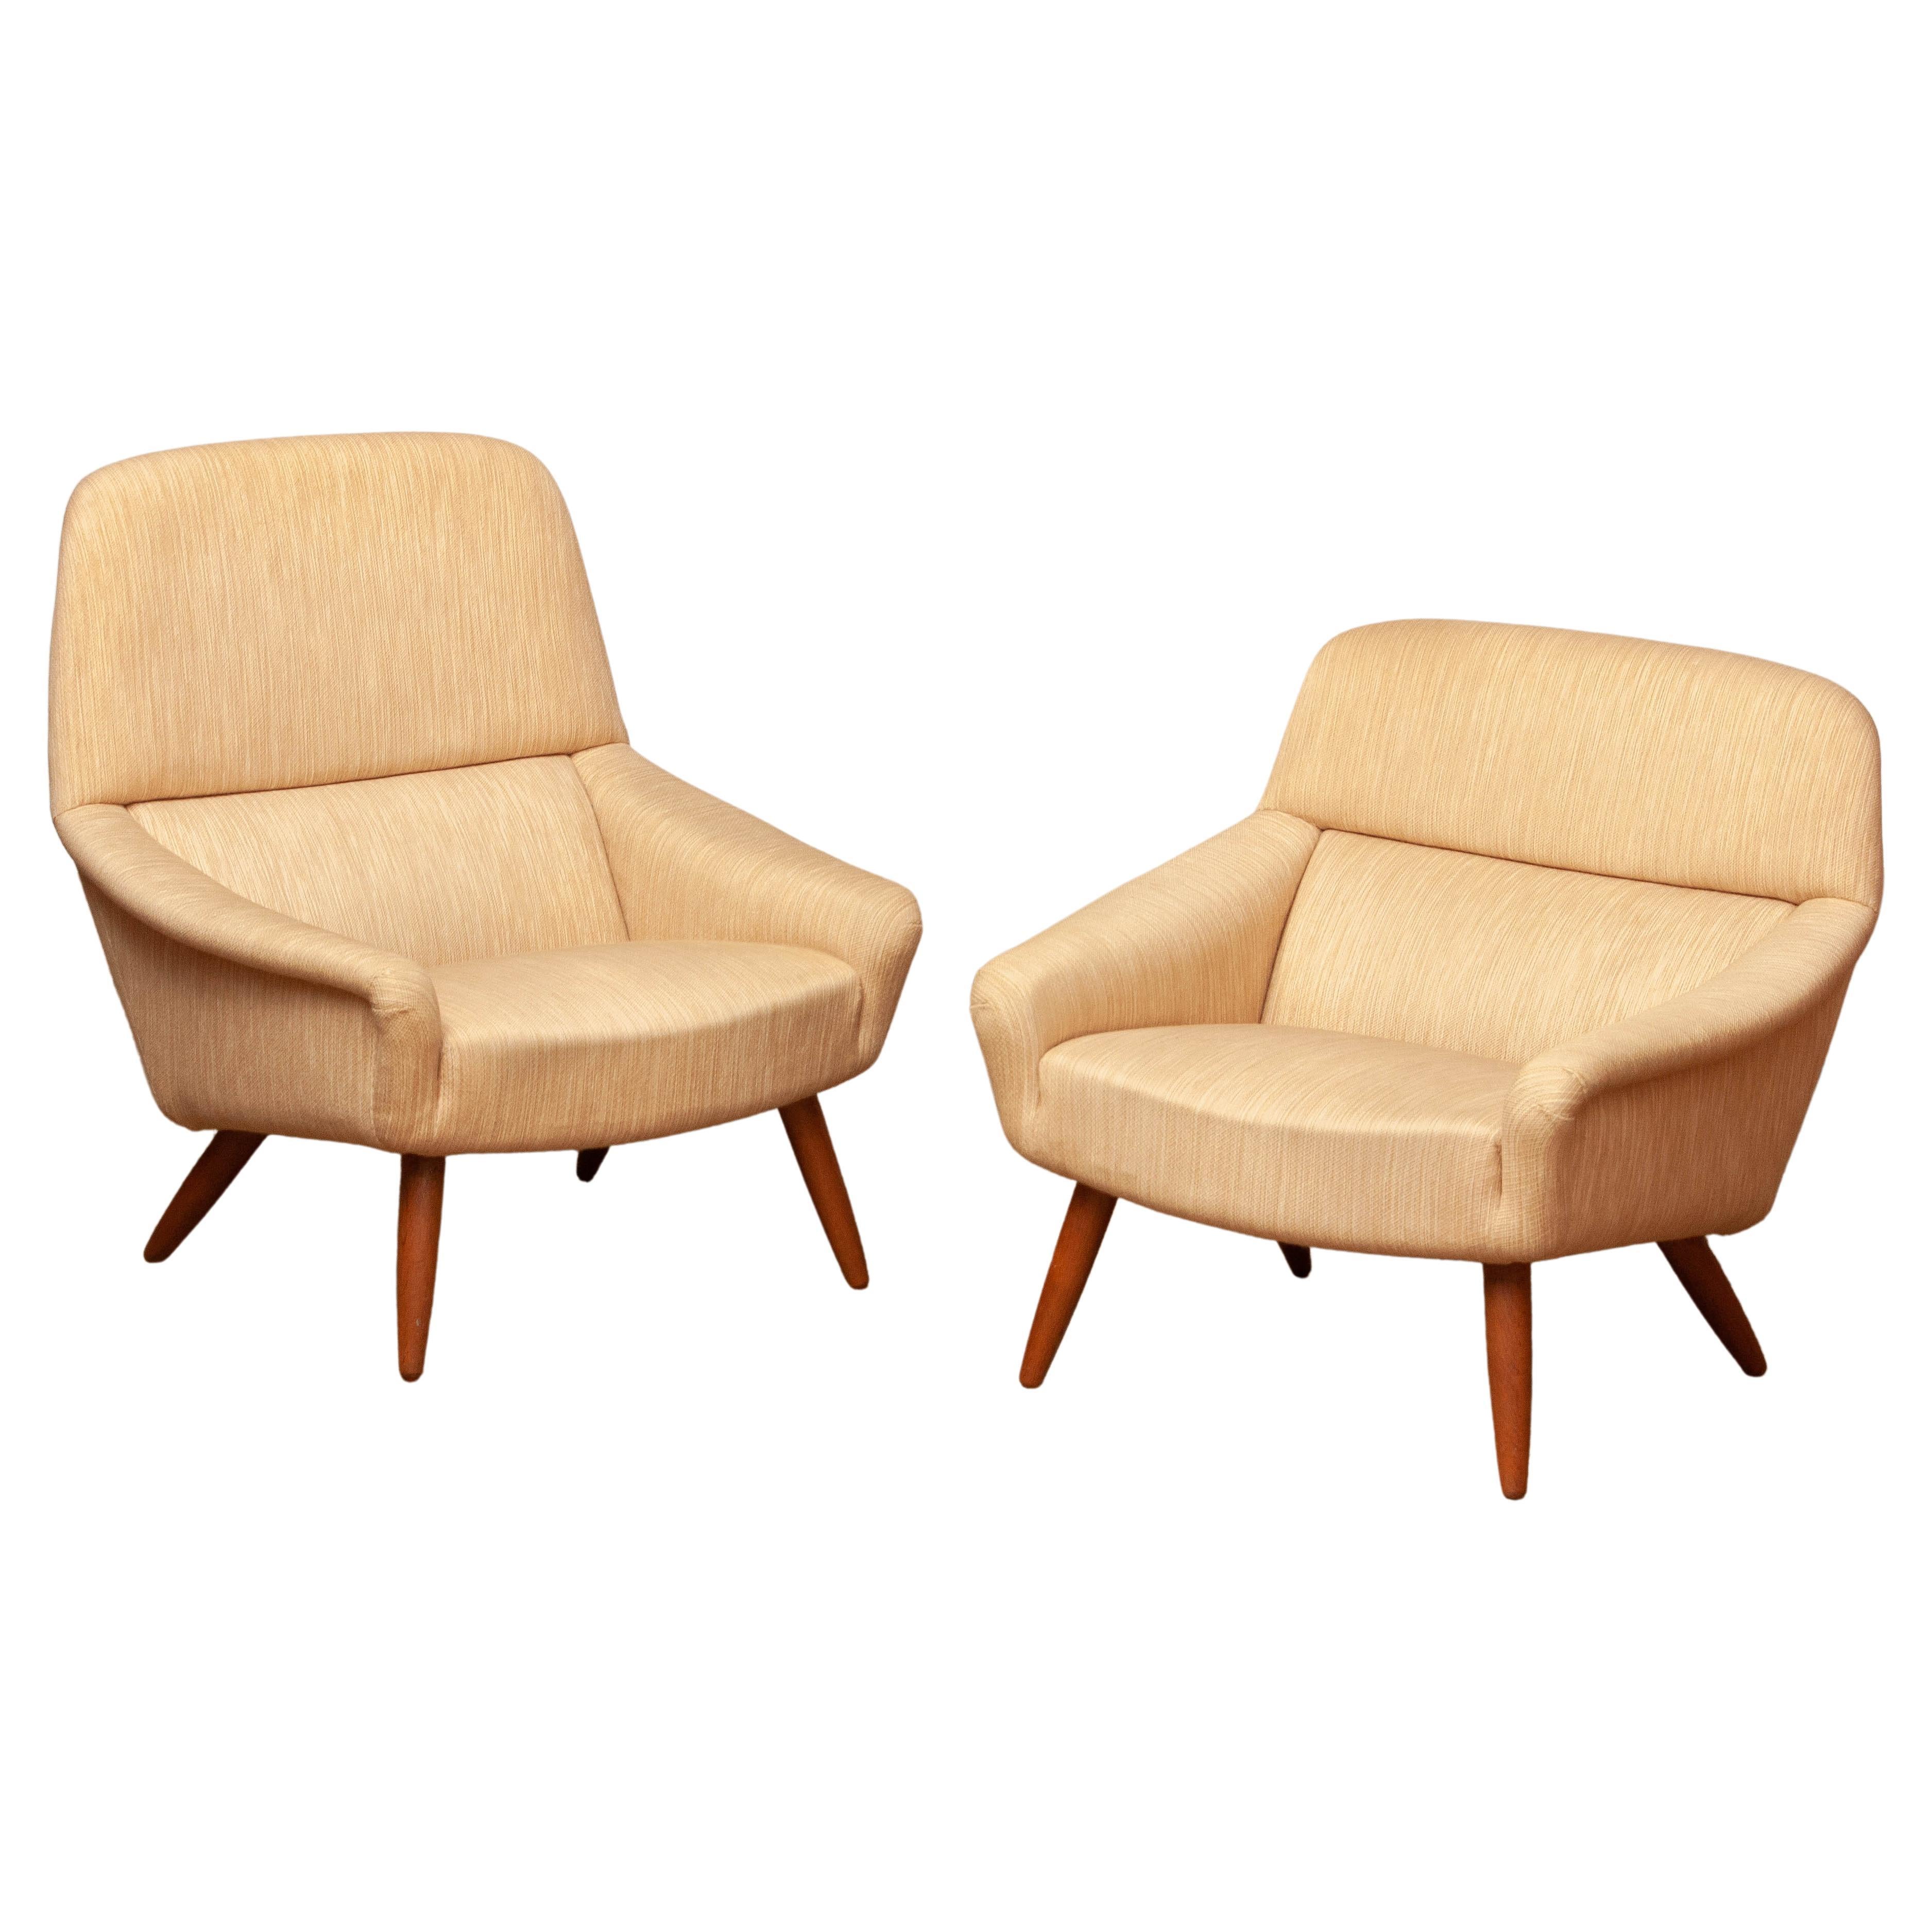 1960s Pair Wool and Oak Lounge Chairs by Leif Hansen for Kronen in Denmark For Sale